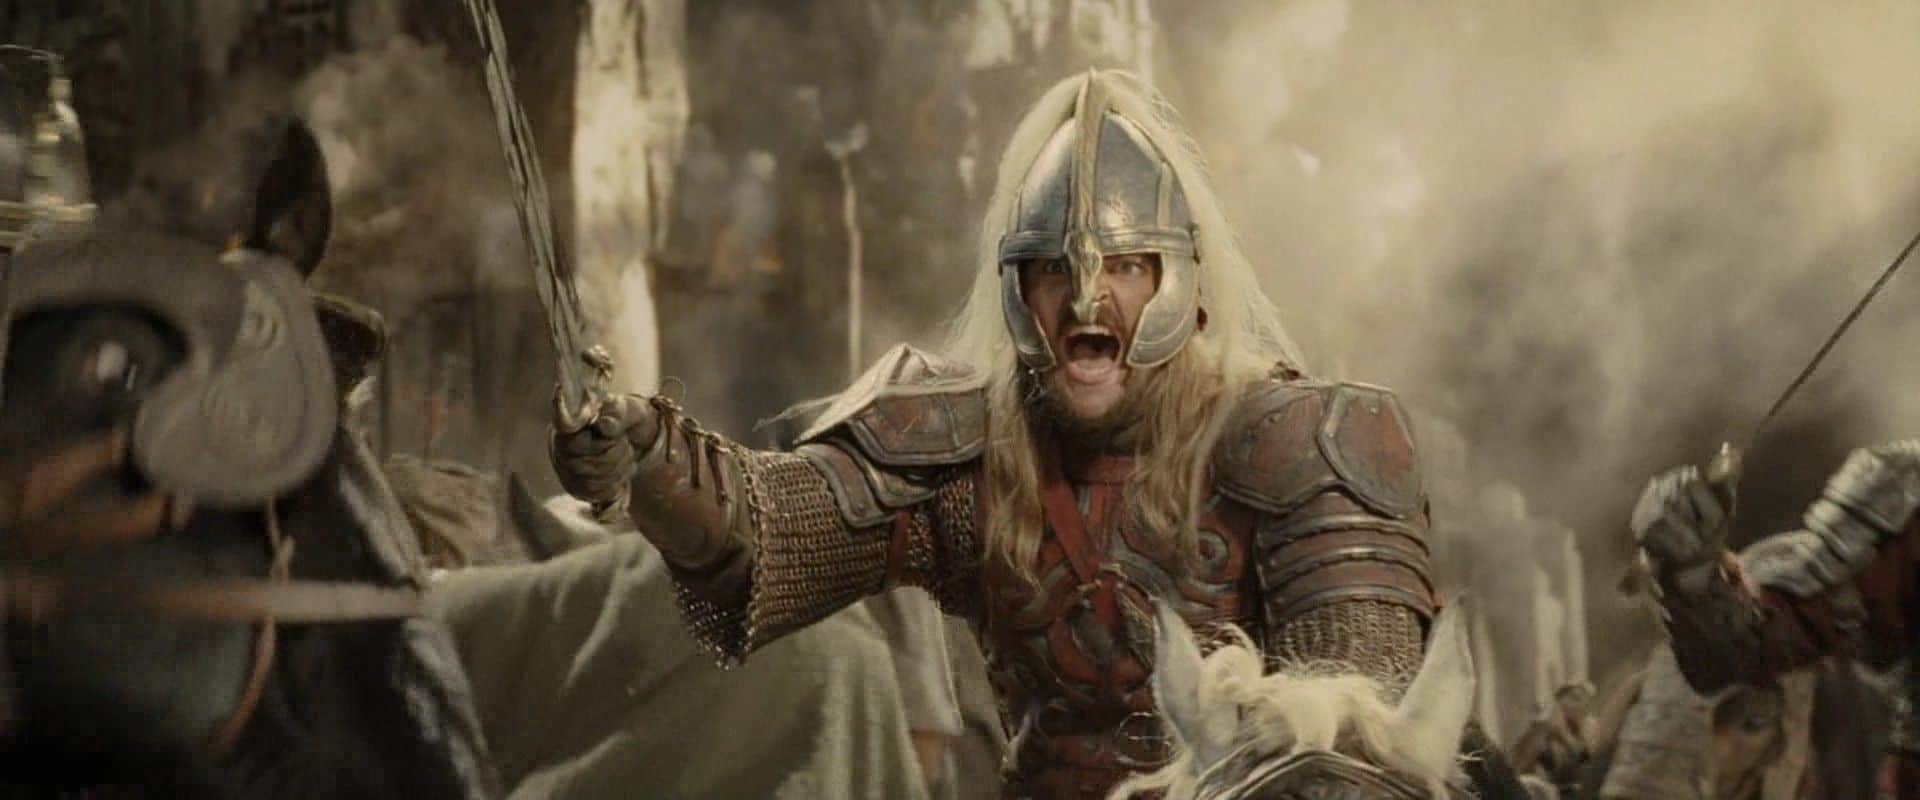 The War Of The Rohirrim - Cast, Release Date And More - LRM